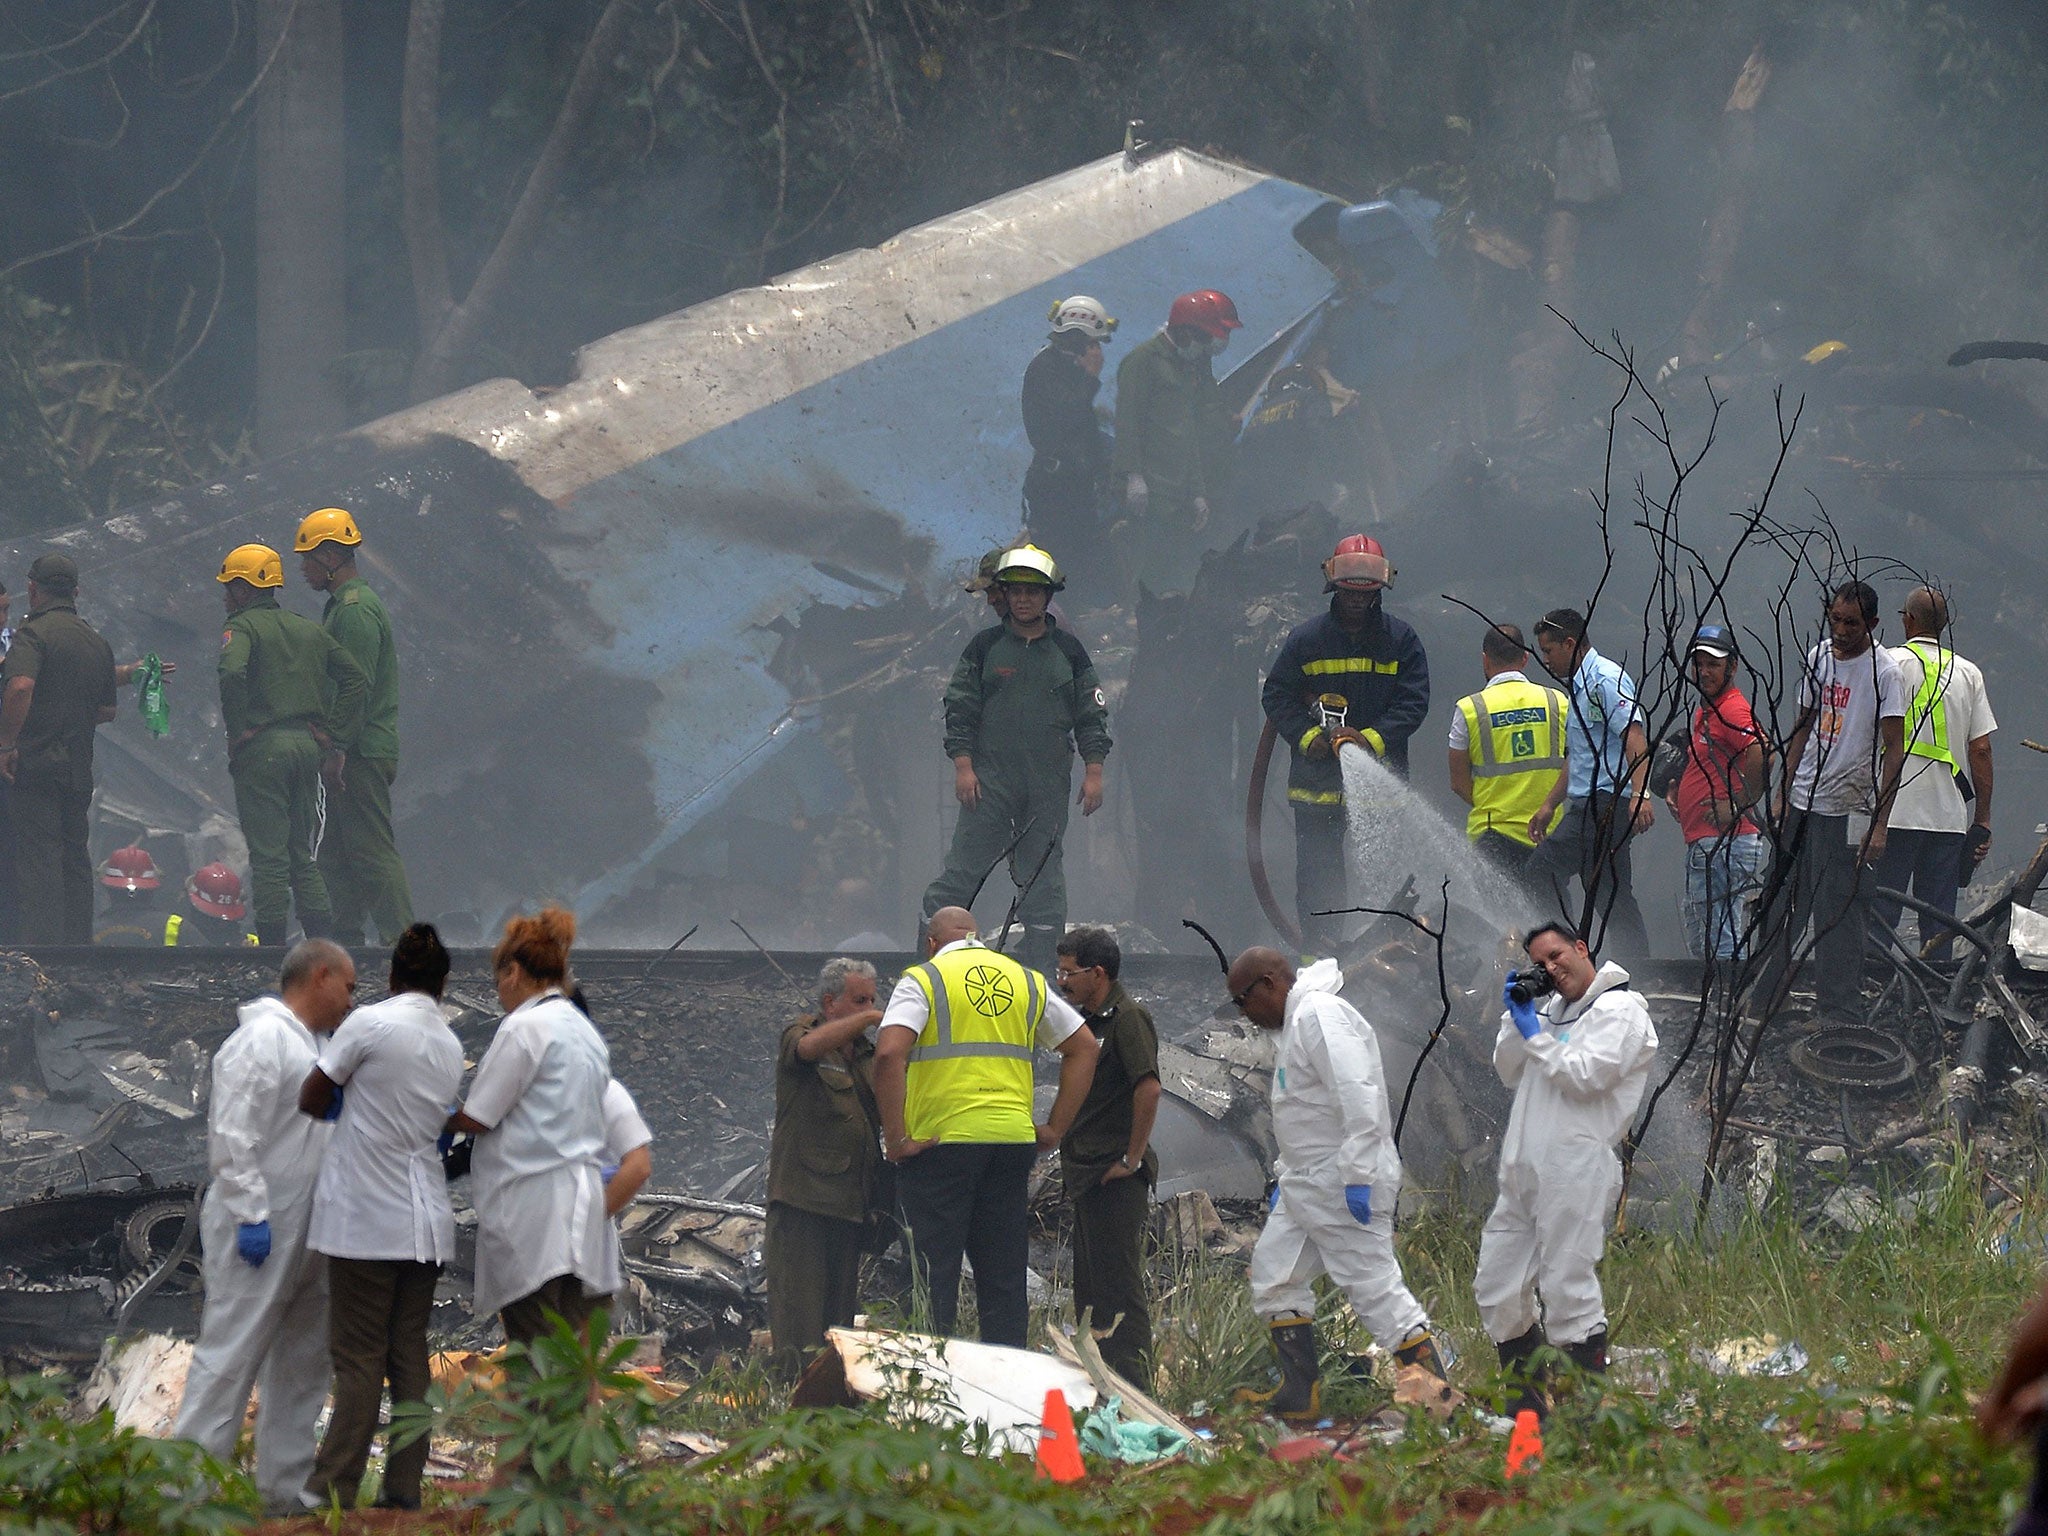 Emergency personnel at the site of the accident near Havana’s Jose Marti airport